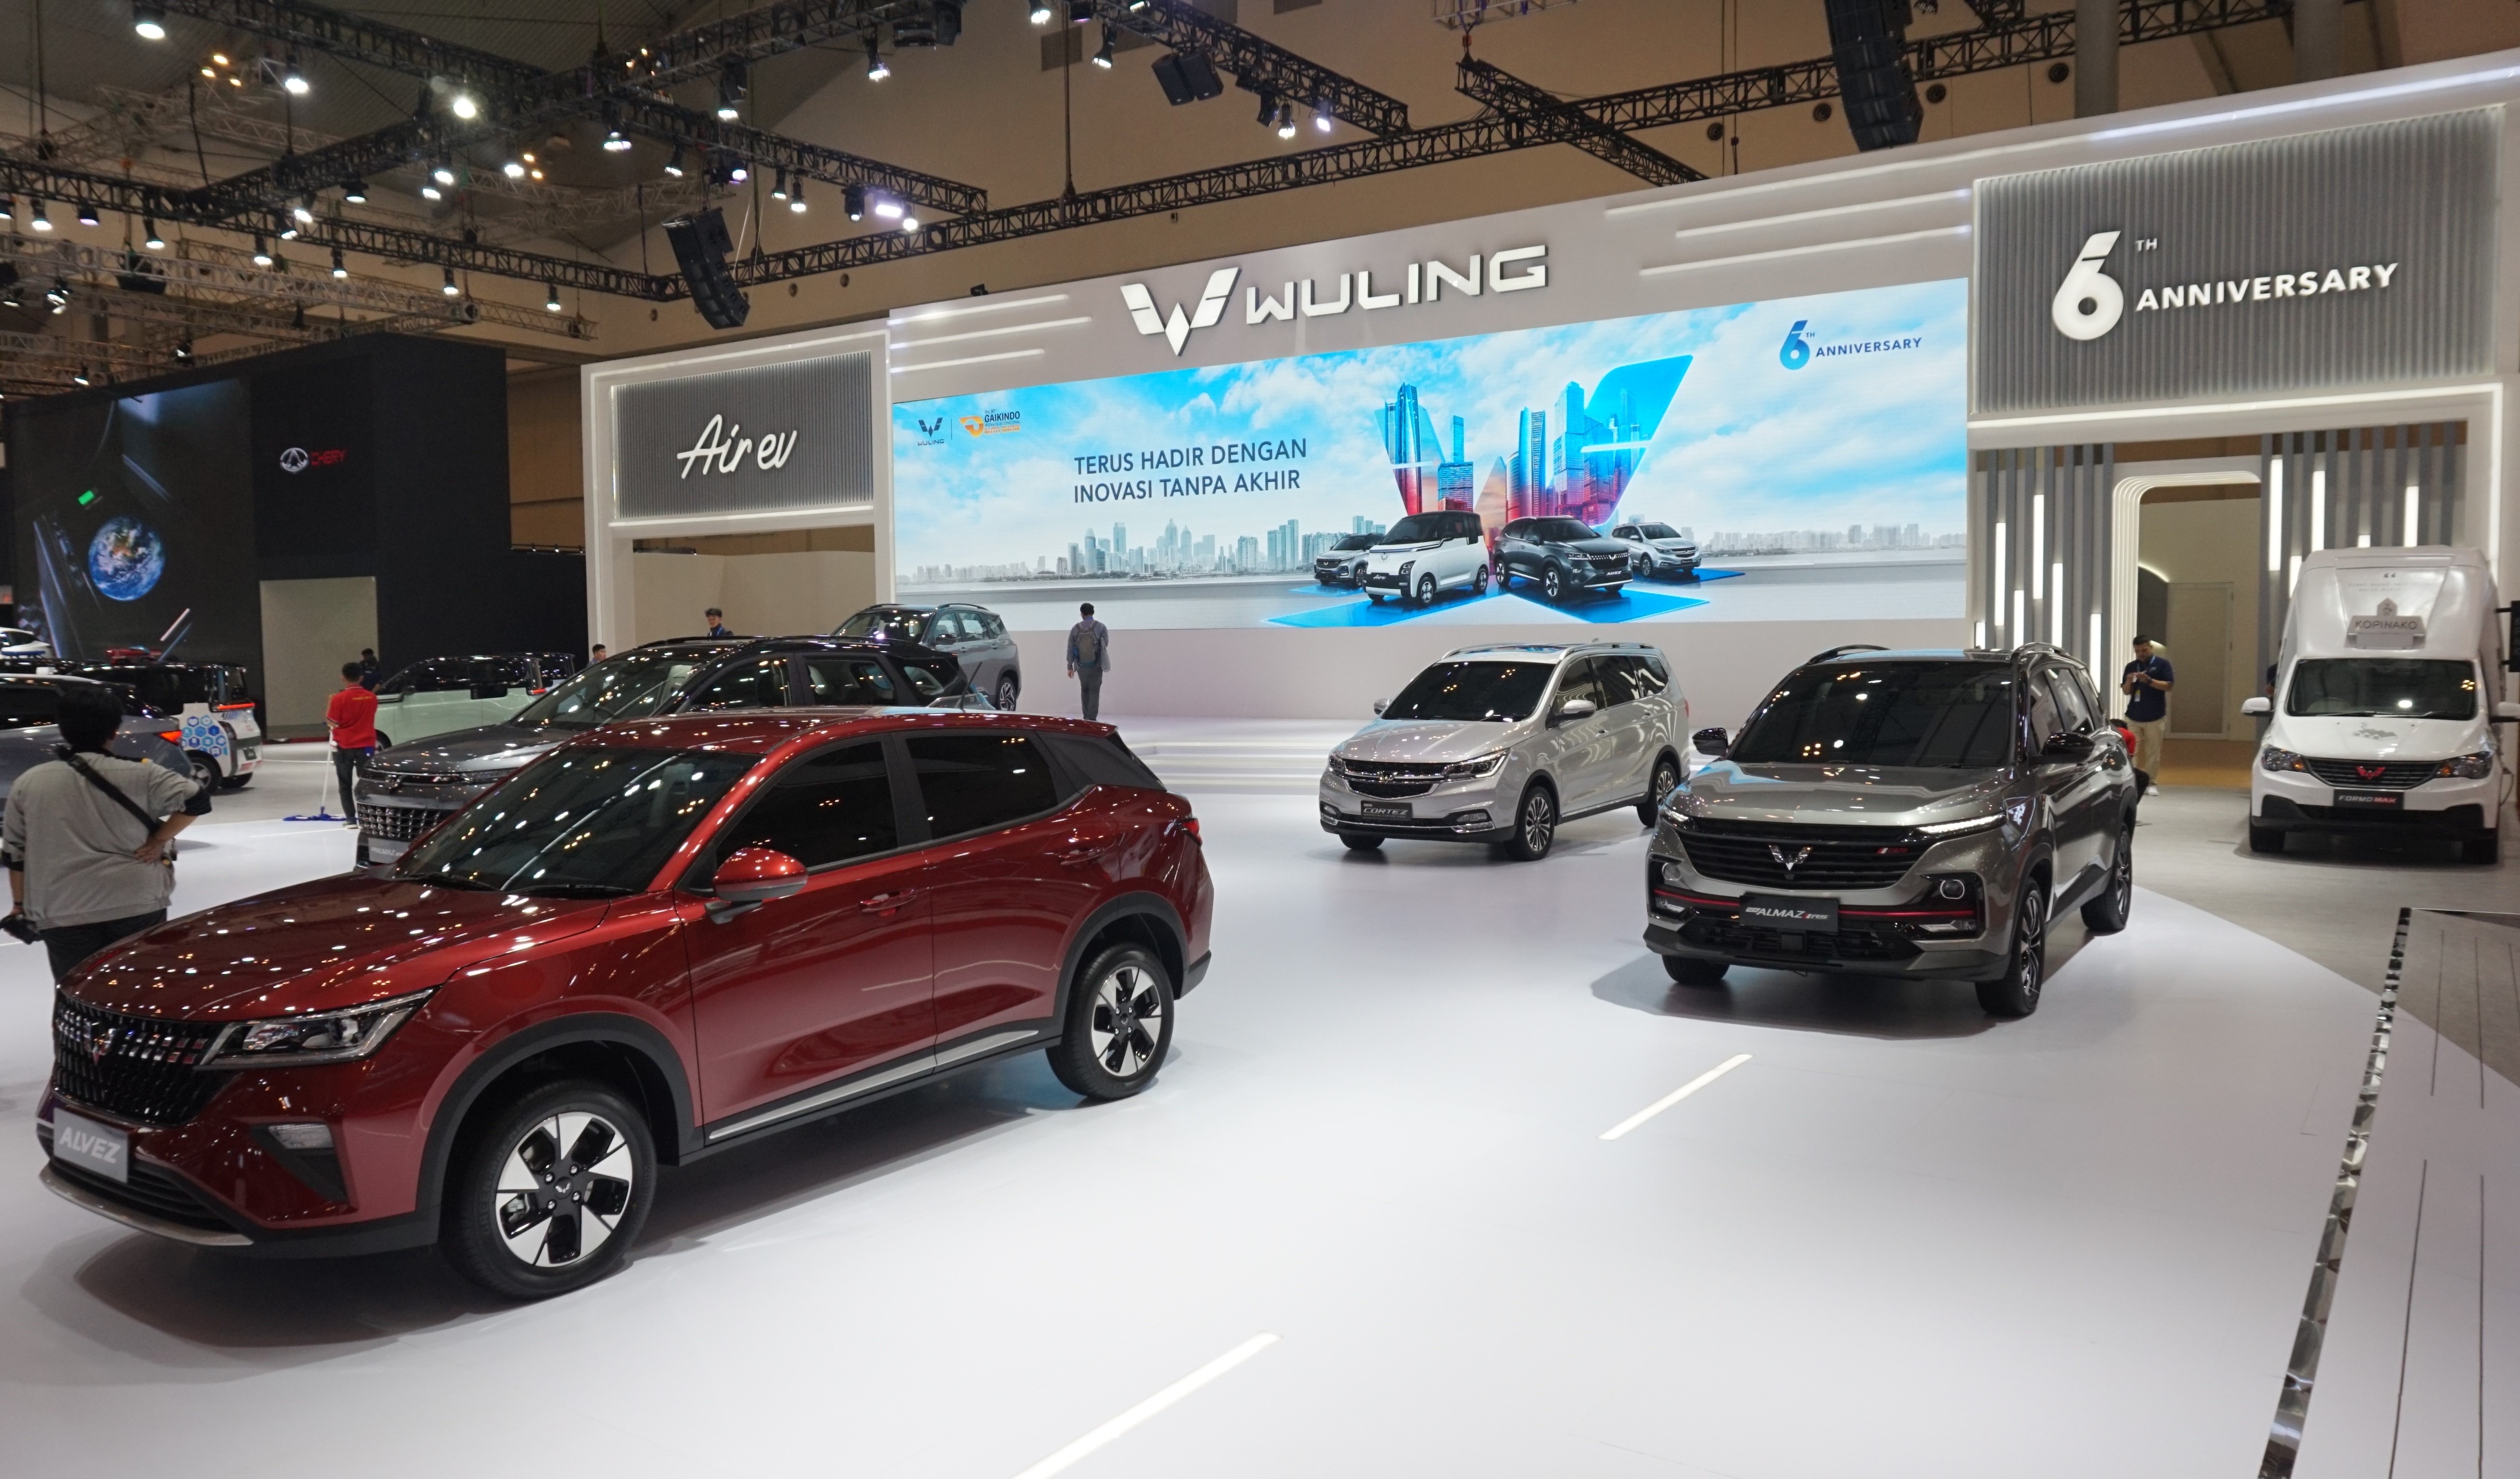 Image Wuling Brings the Spirit of Continuously Presenting Endless Innovation at the GIIAS Exhibition